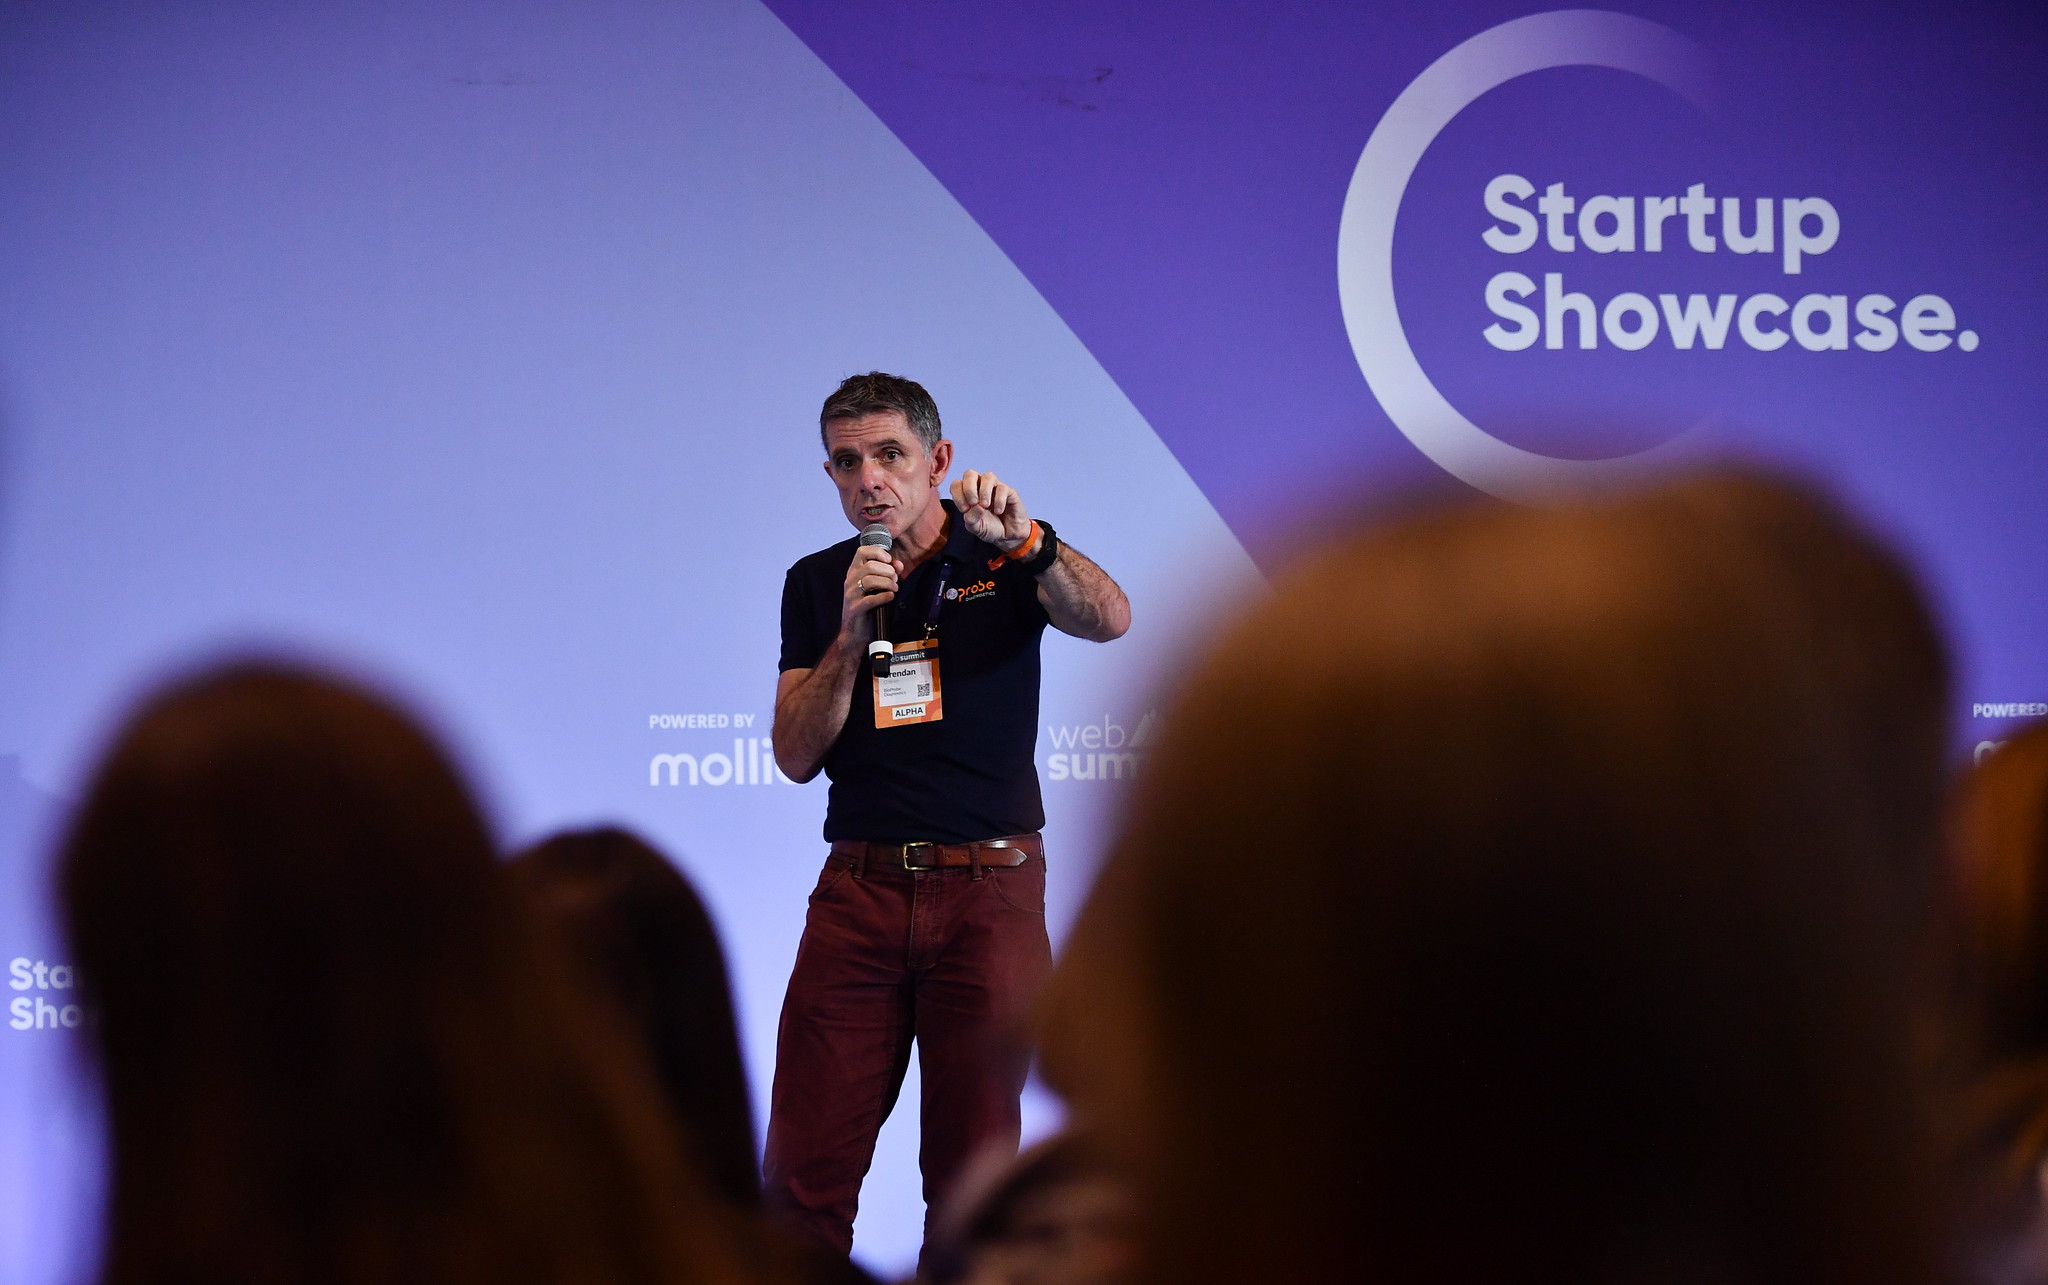 A person stands on a stage holding a microphone and gesturing emphatically. They appear to be speaking. They stand in front of a wall that features the text 'Startup Showcase'. The backs of audience members' heads crowd the foreground.